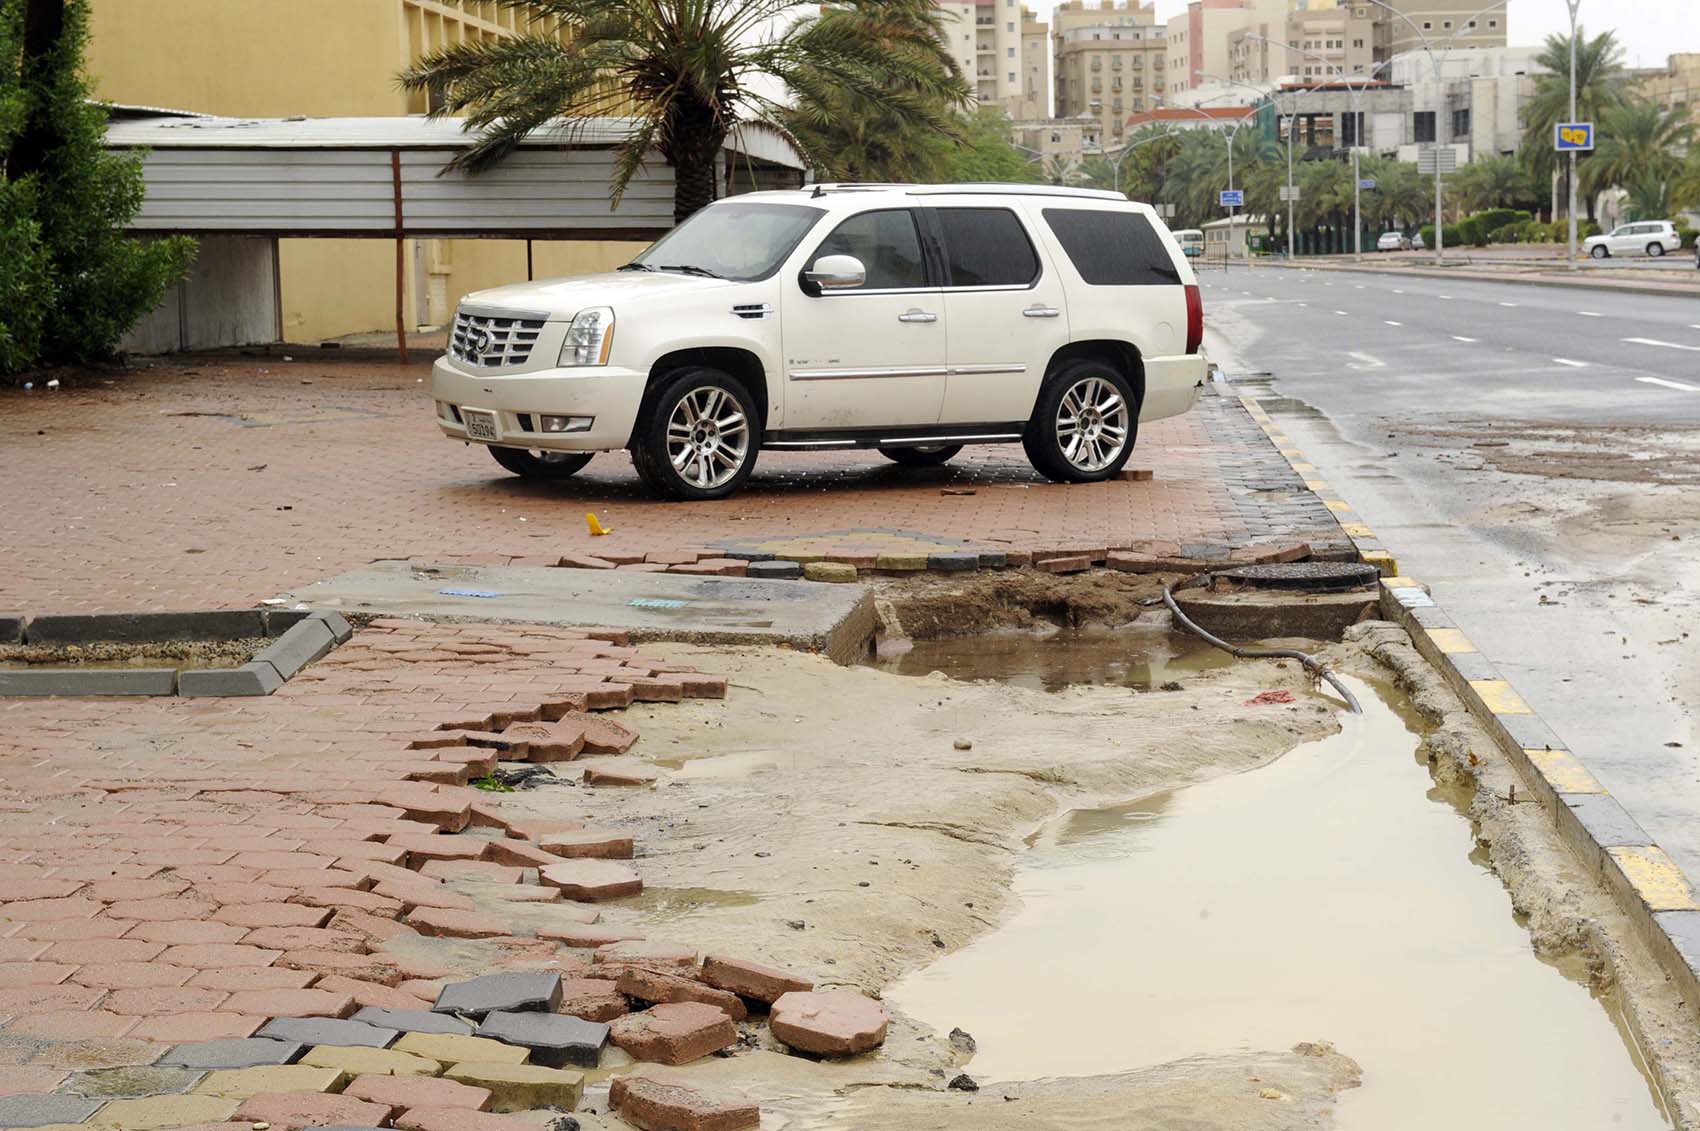 Pavement collapses partially due to rainfall